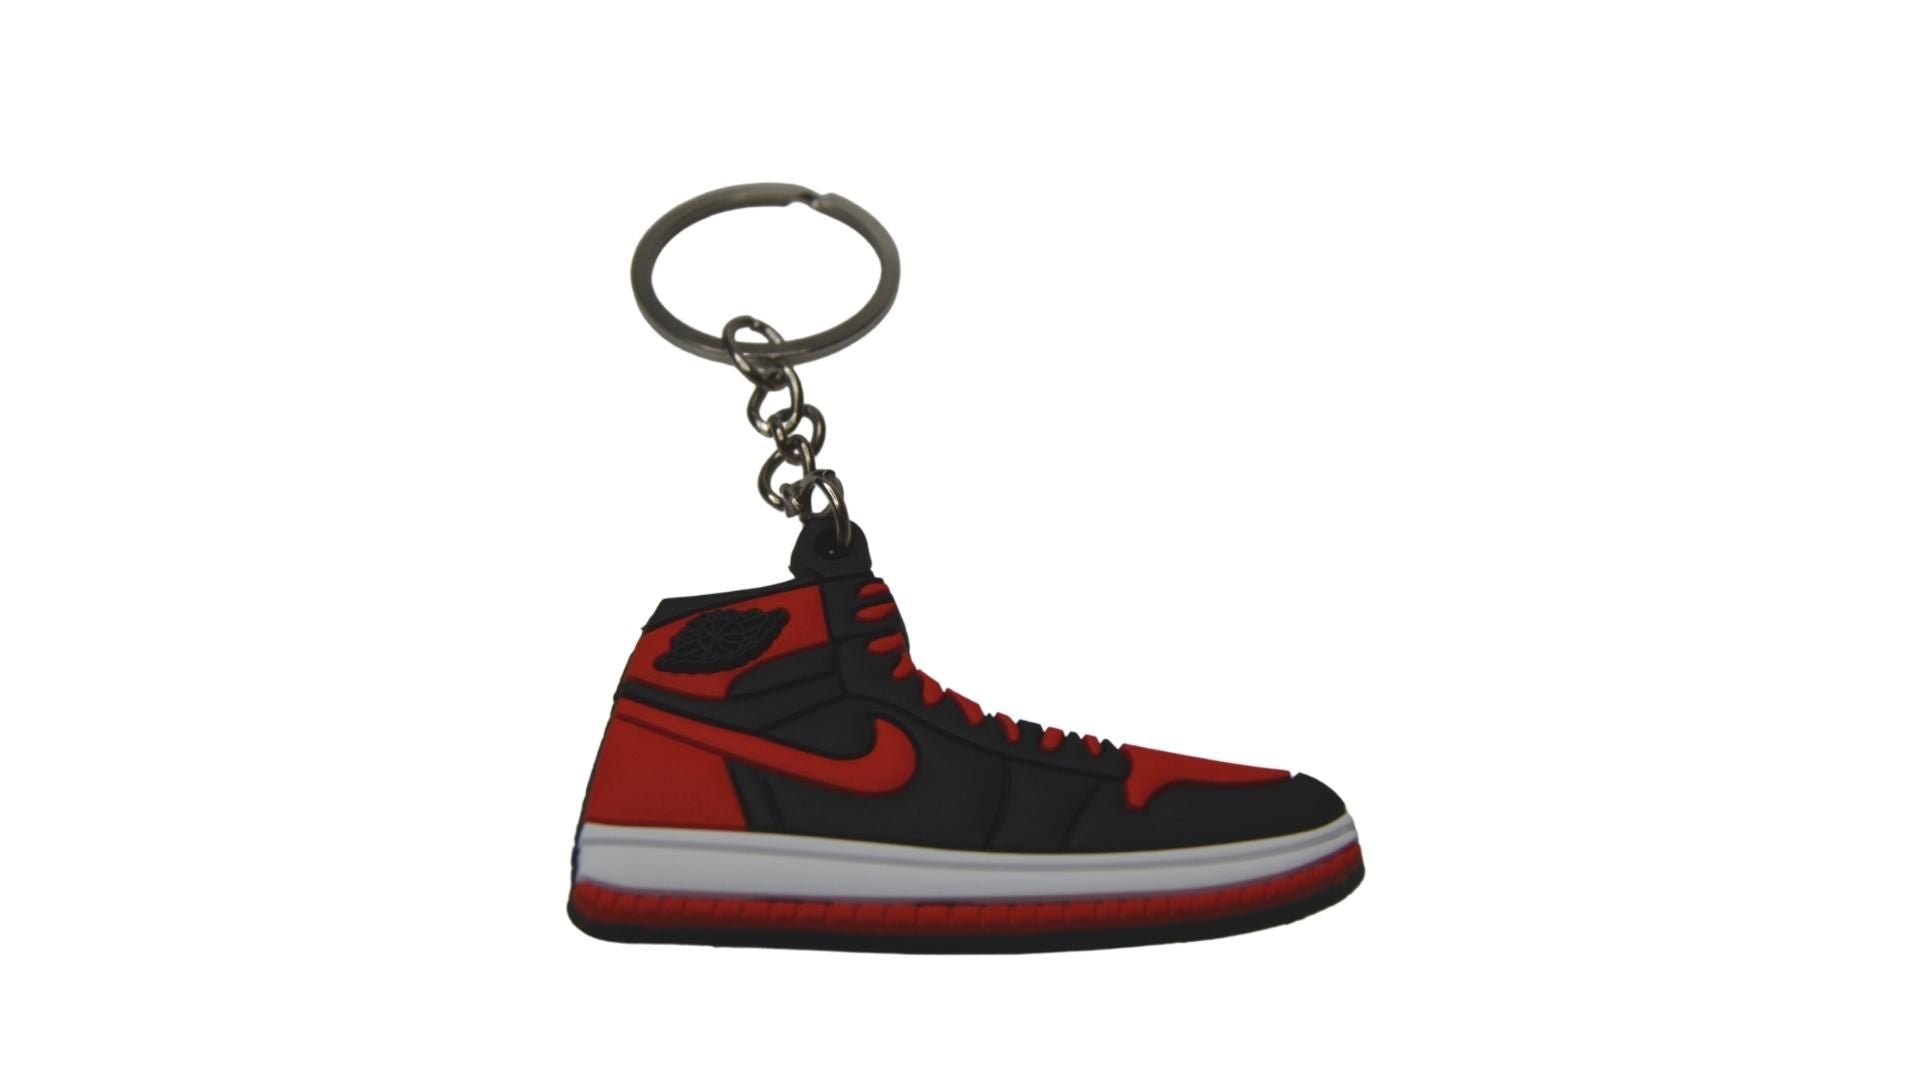 Product Code: J1BRW. Upper Material: Silicon, Inner Material: Textile, Rubber Soles Silicon icon sneaker keyrings to match up with those head turning kicks. Great gift idea and stocking filler for any sneaker lover. Get the range of keyrings from Foot World. Disclaimer - Brand OTHER-Unisex-OTHER-Foot World